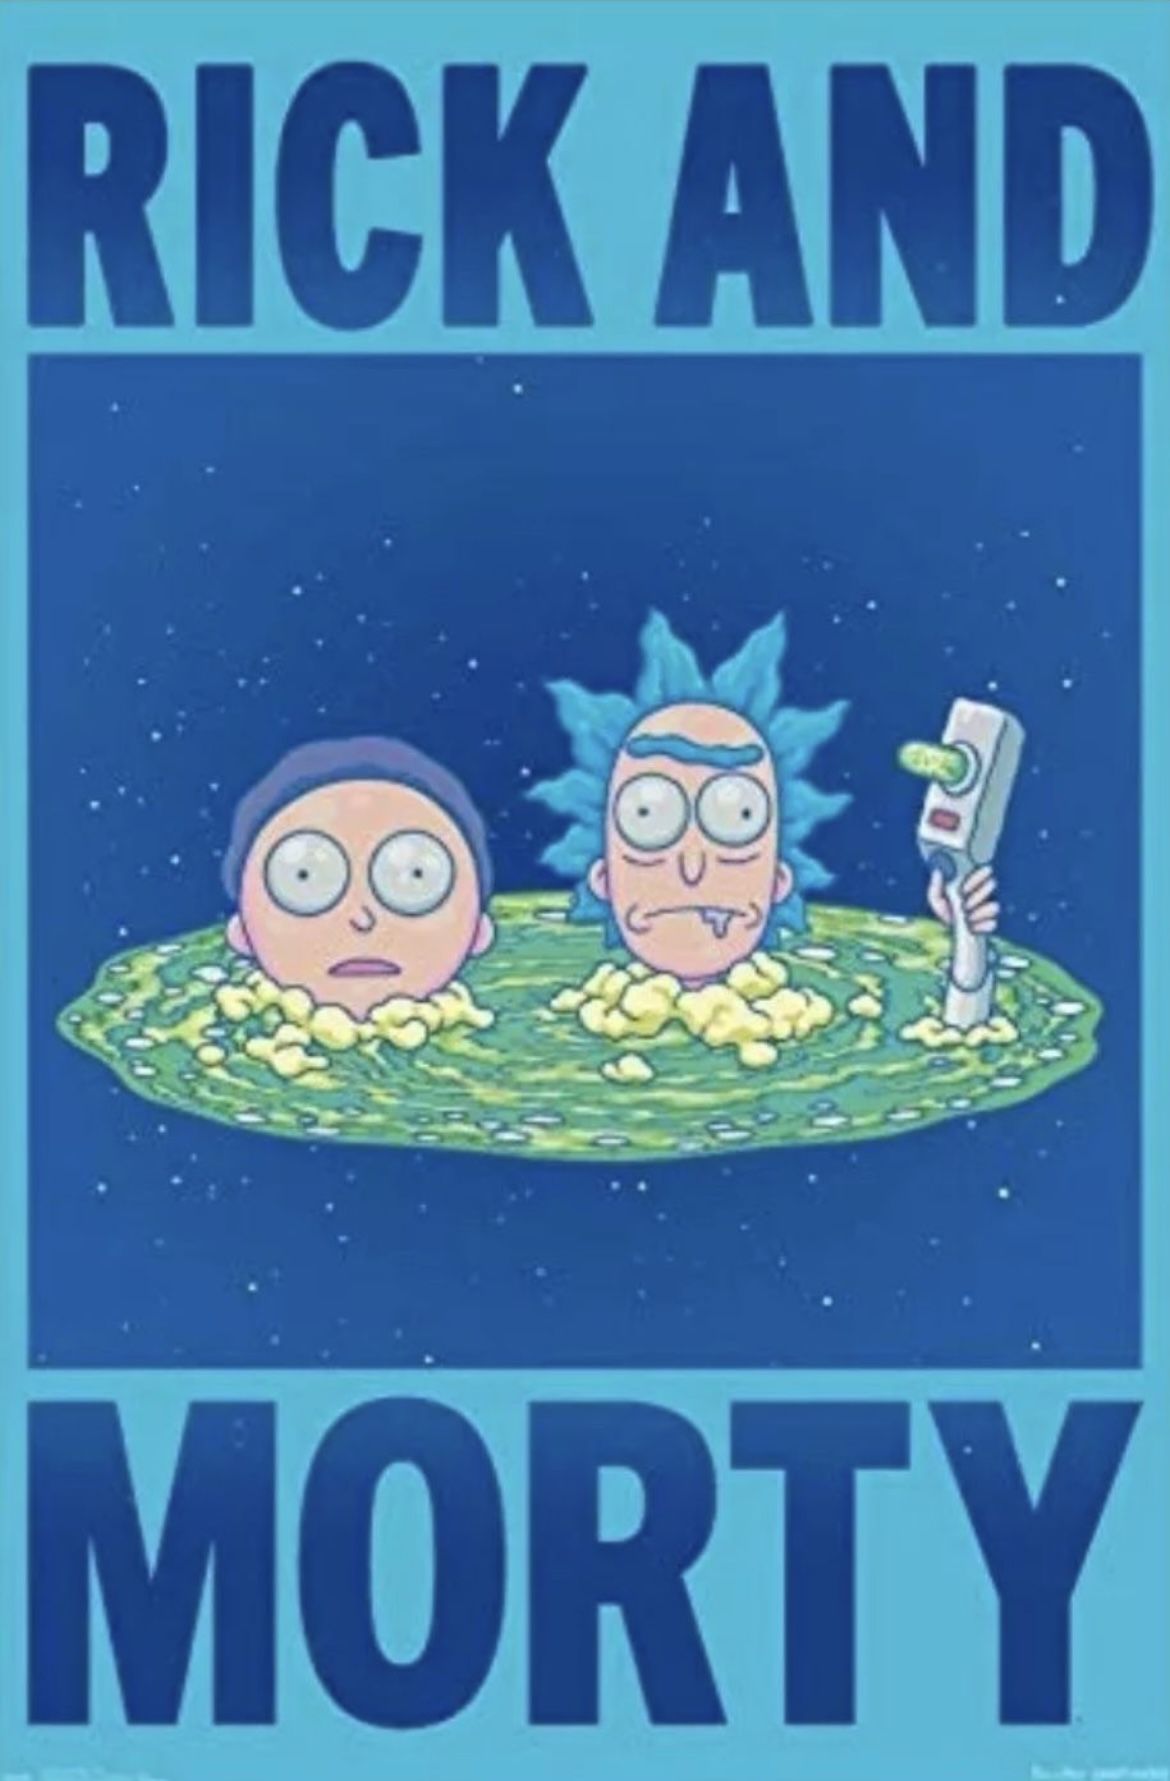 Rick and morty poster new